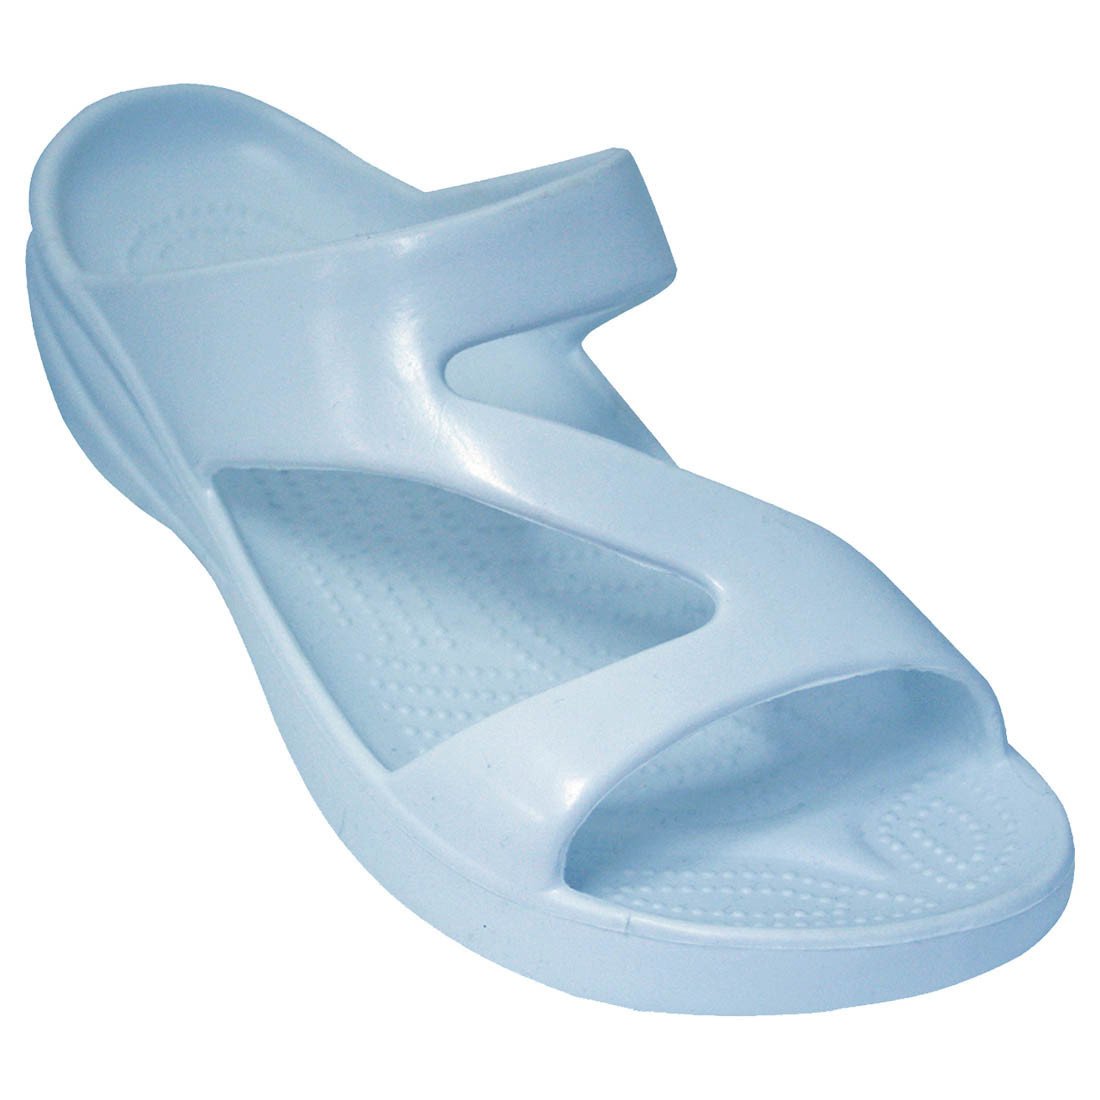 Women's Z Sandals - Baby Blue by DAWGS USA